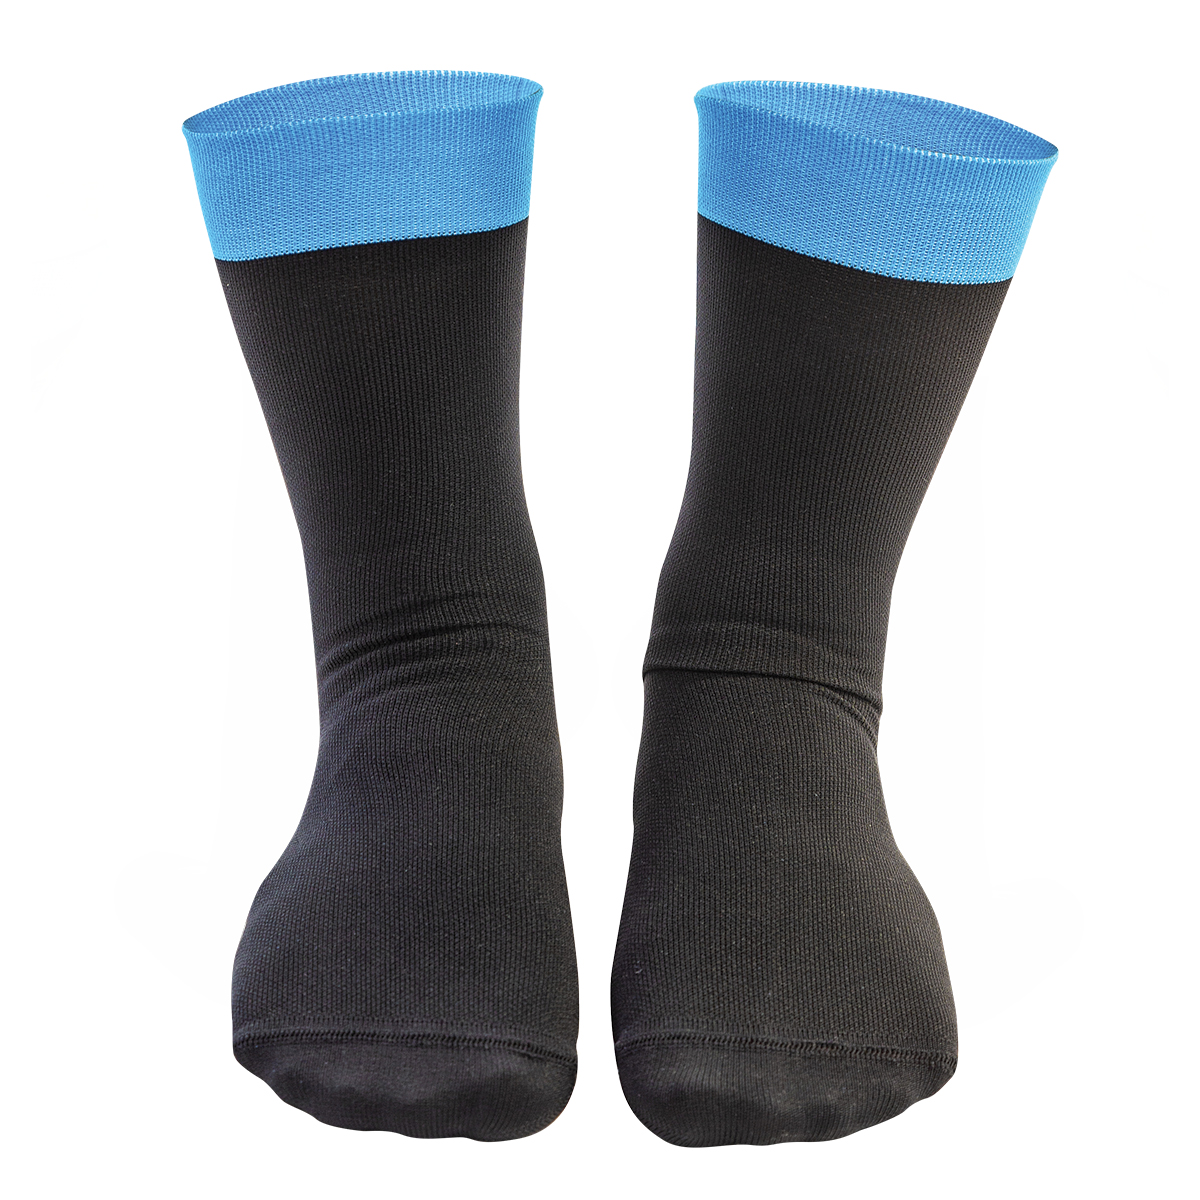 Threeface blue cycling socks for cyclist by Belvedere Riccione